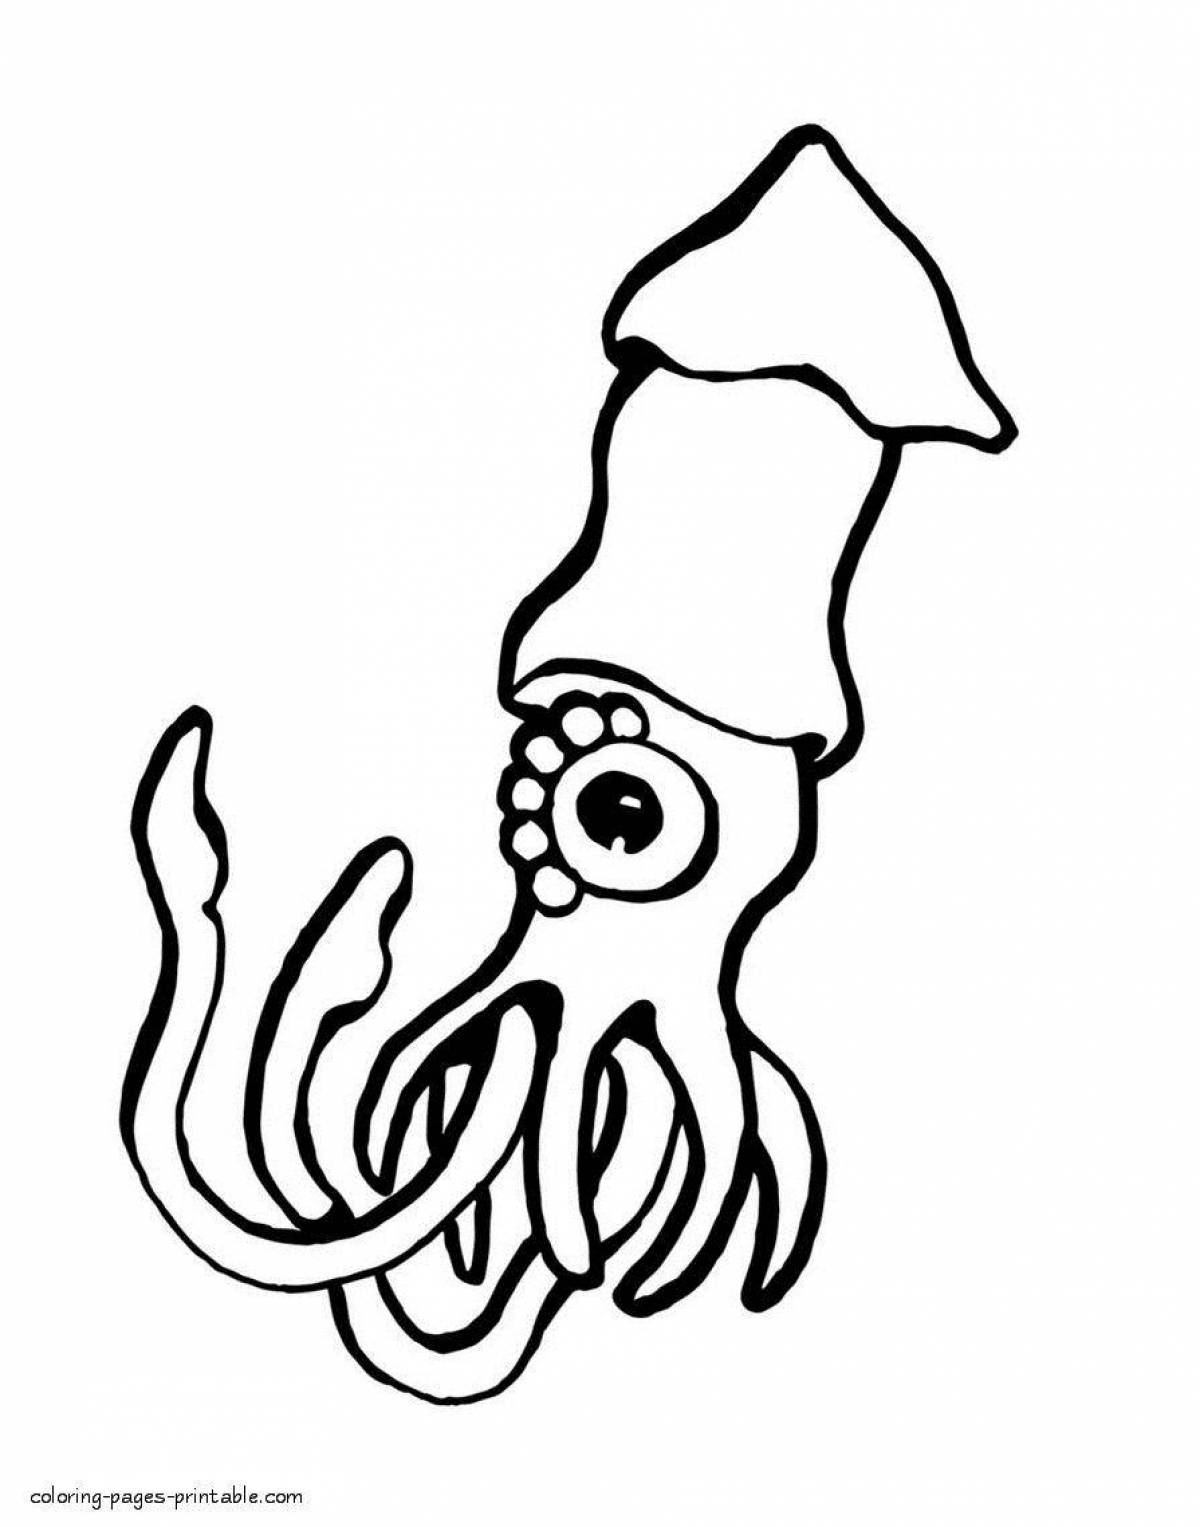 Fun coloring squid for kids